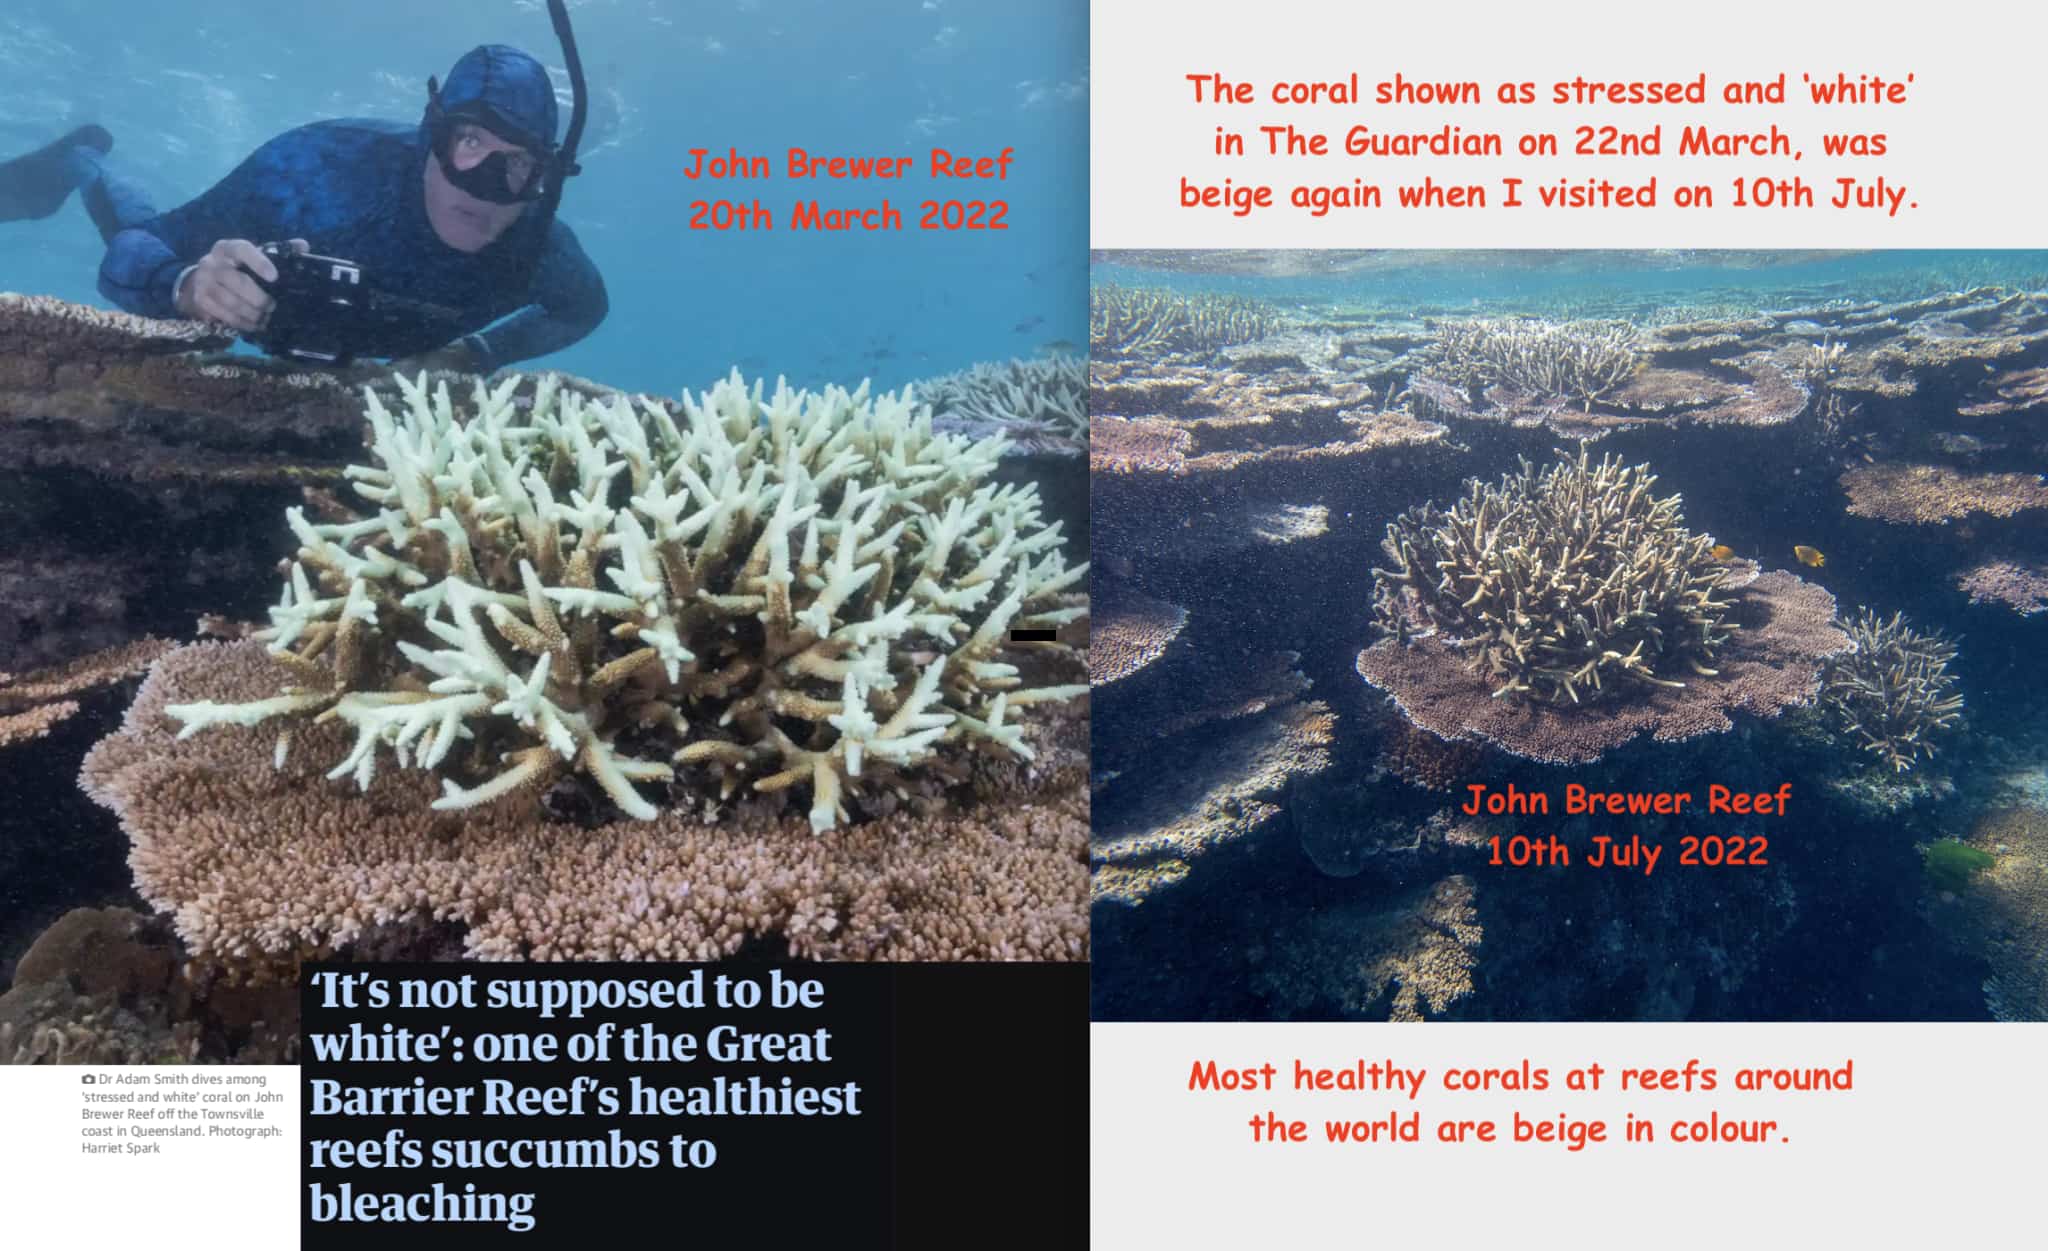 Two contrasting images of John Brewer Reef both showing  beige coral with text overlaid